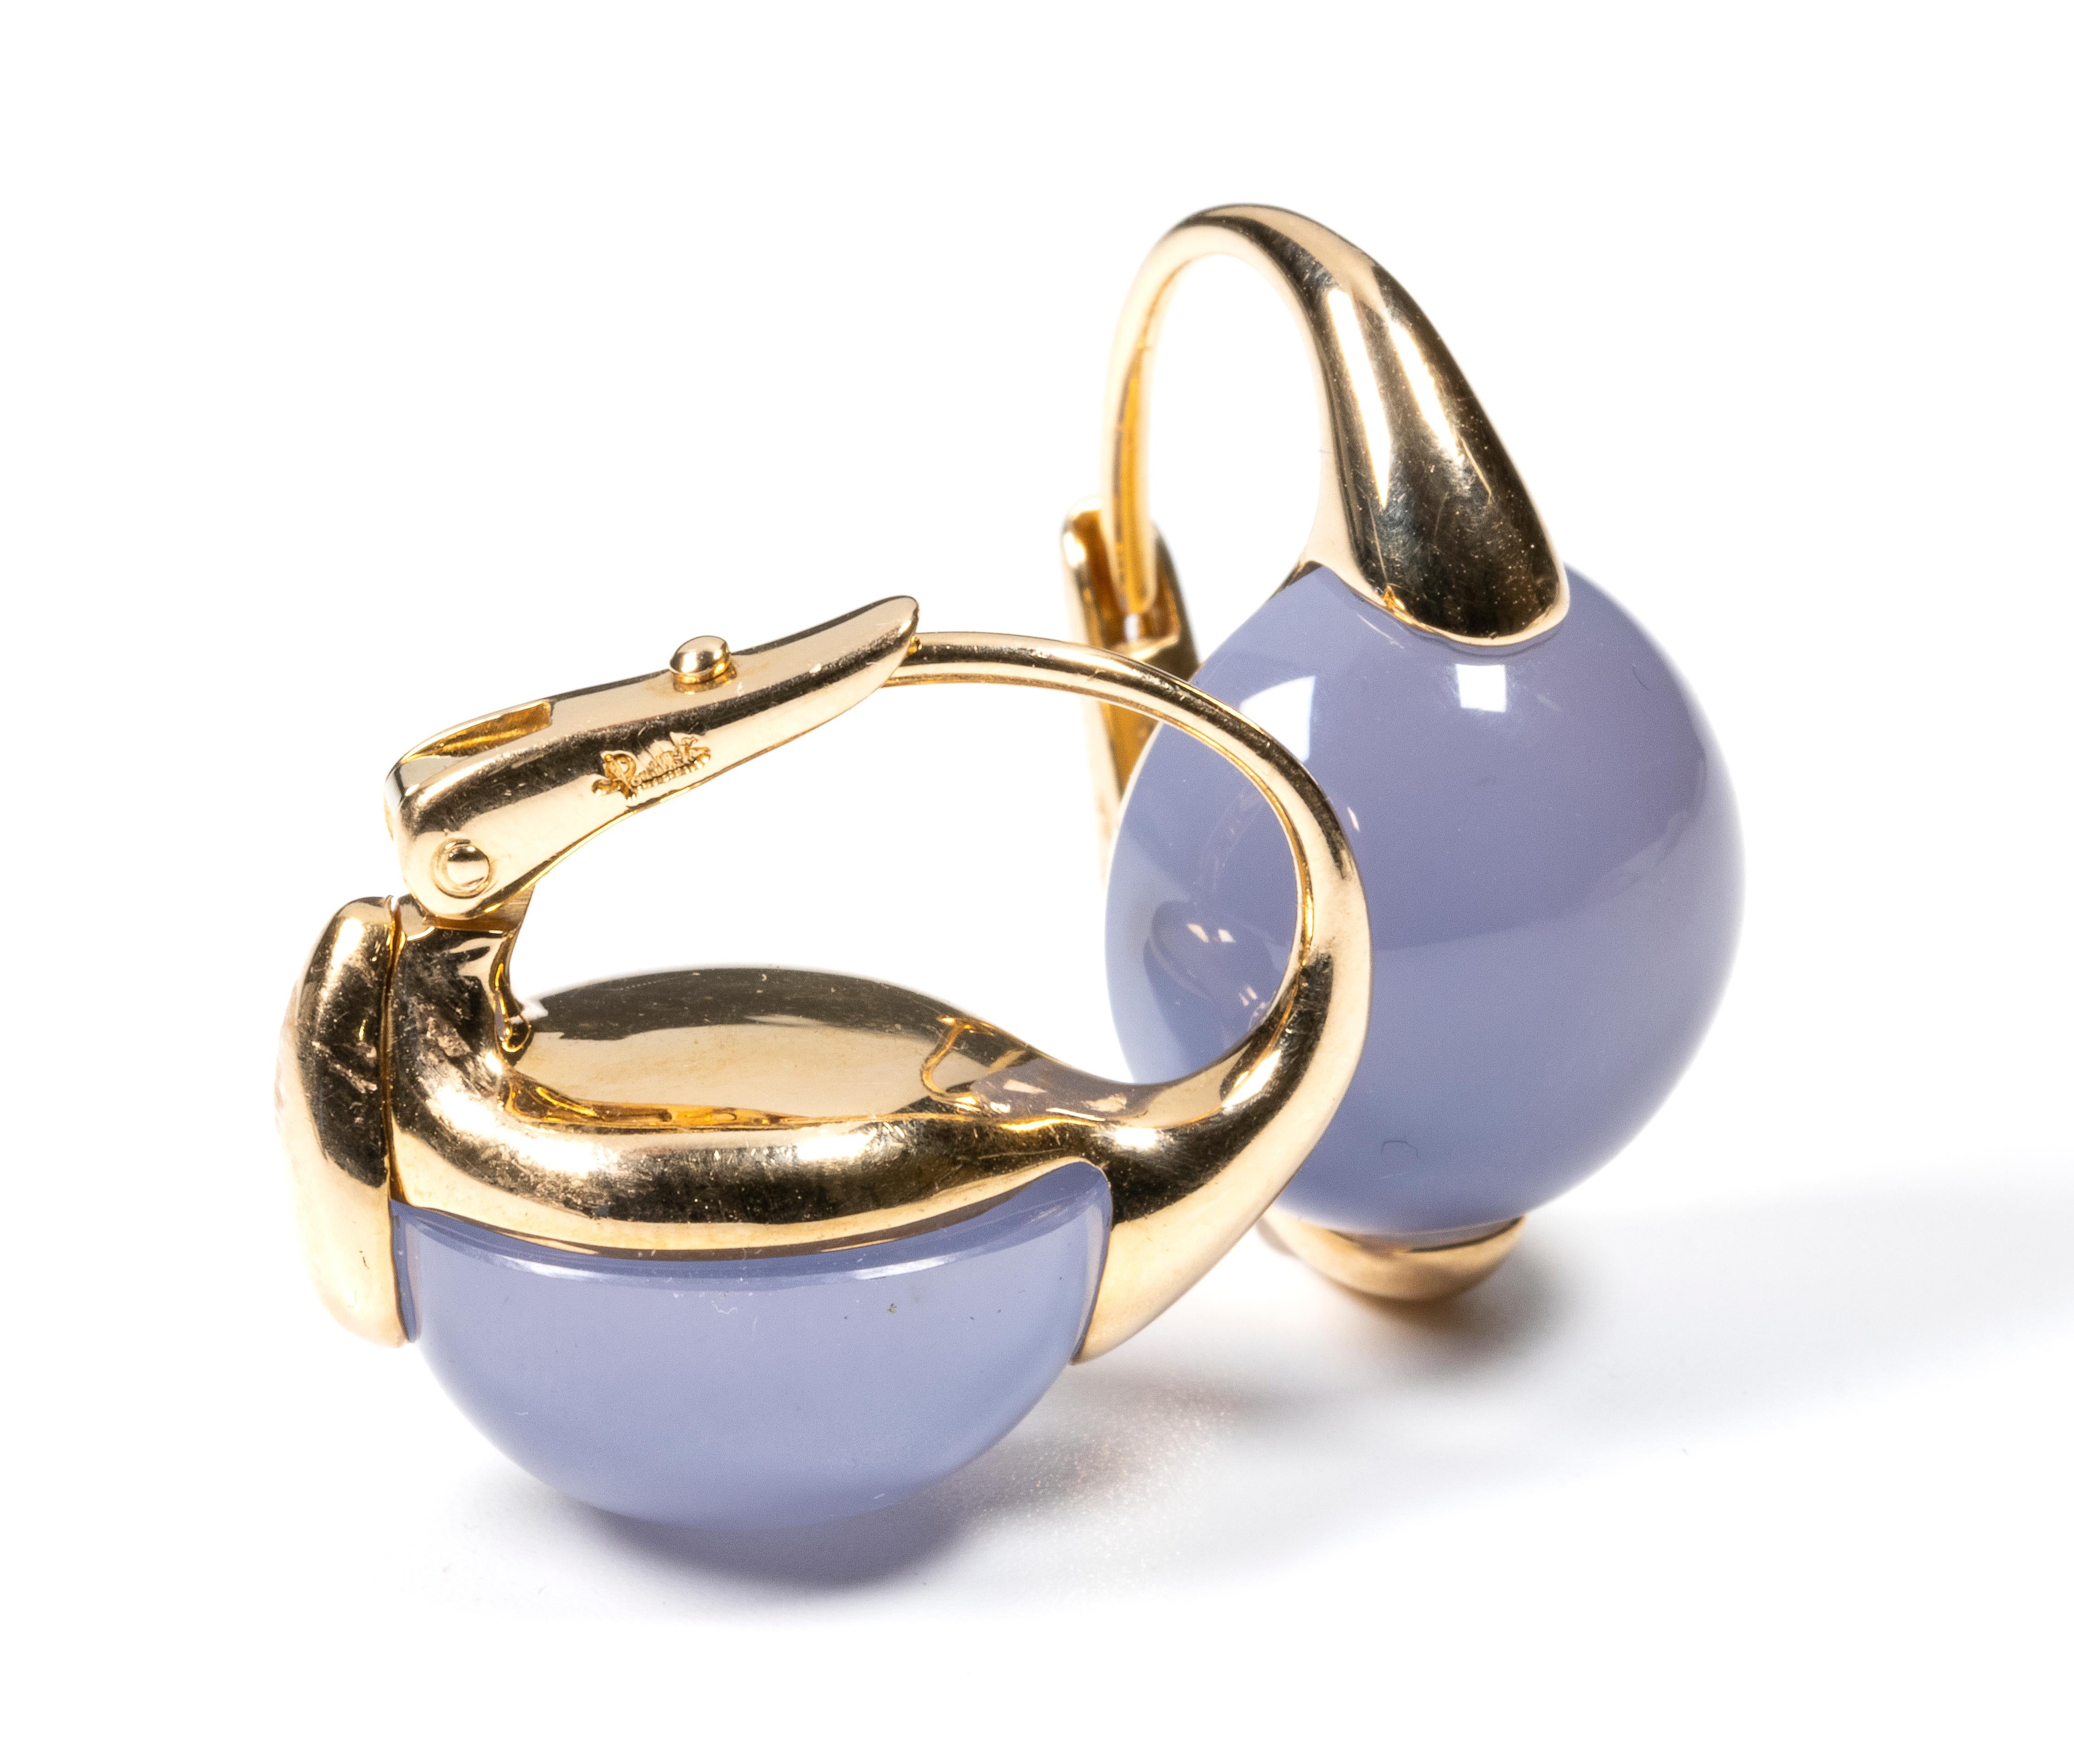 Earrings by Pomellato Luna Collection
Material Yellow Gold 18k and Chalcedony stone 
Cabochon cut
Weight 16,4 grams

